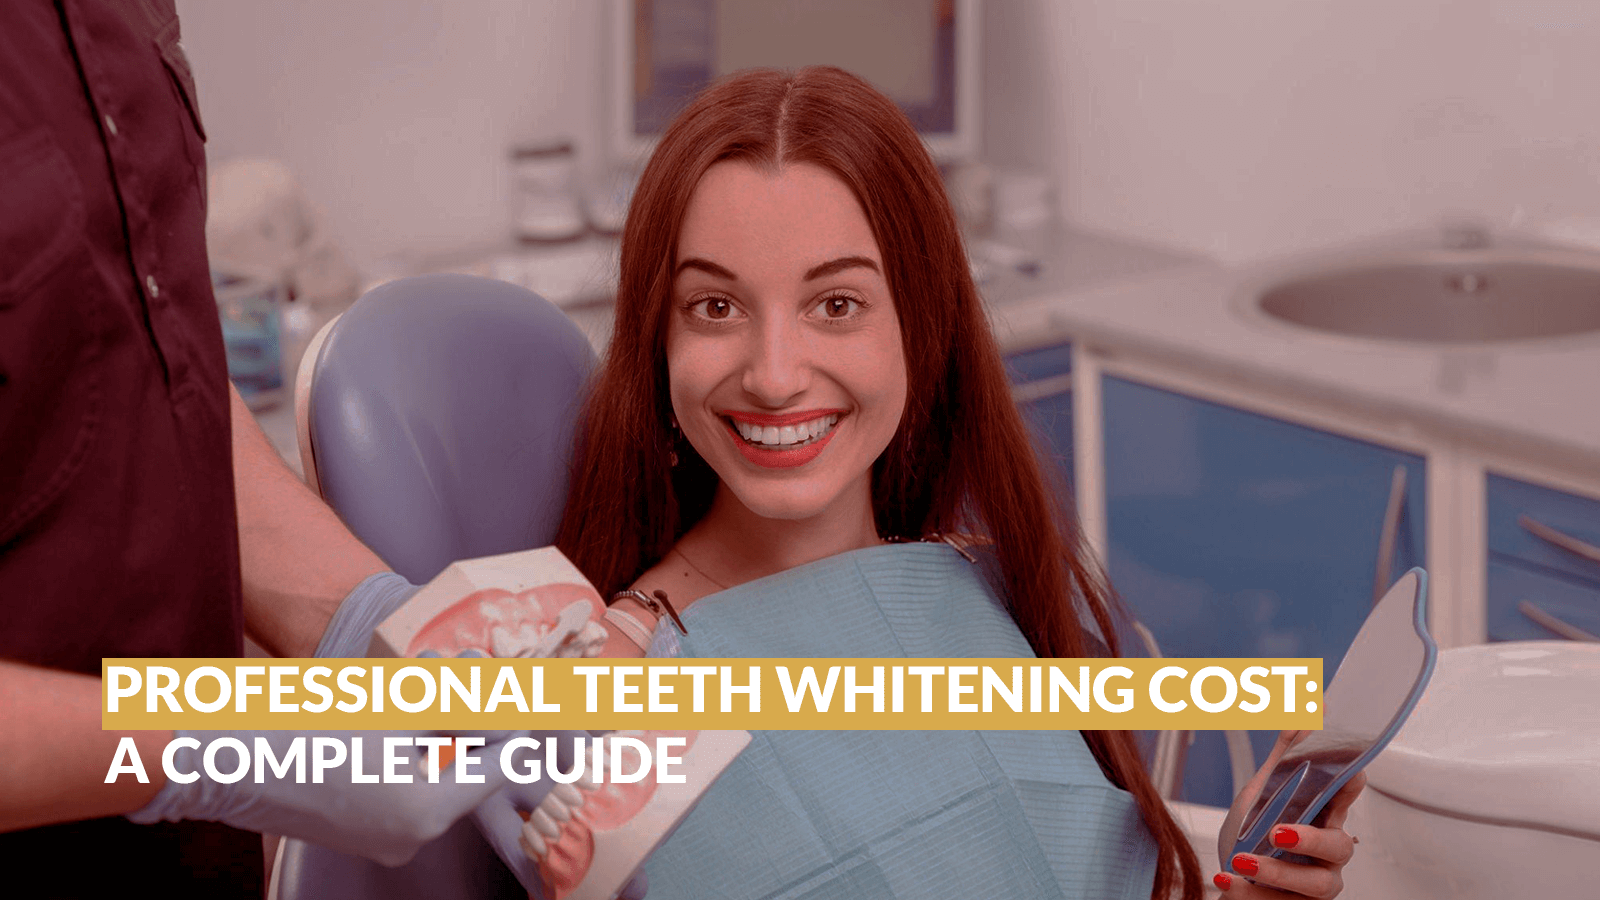 How Much Does Professional Teeth Whitening Cost